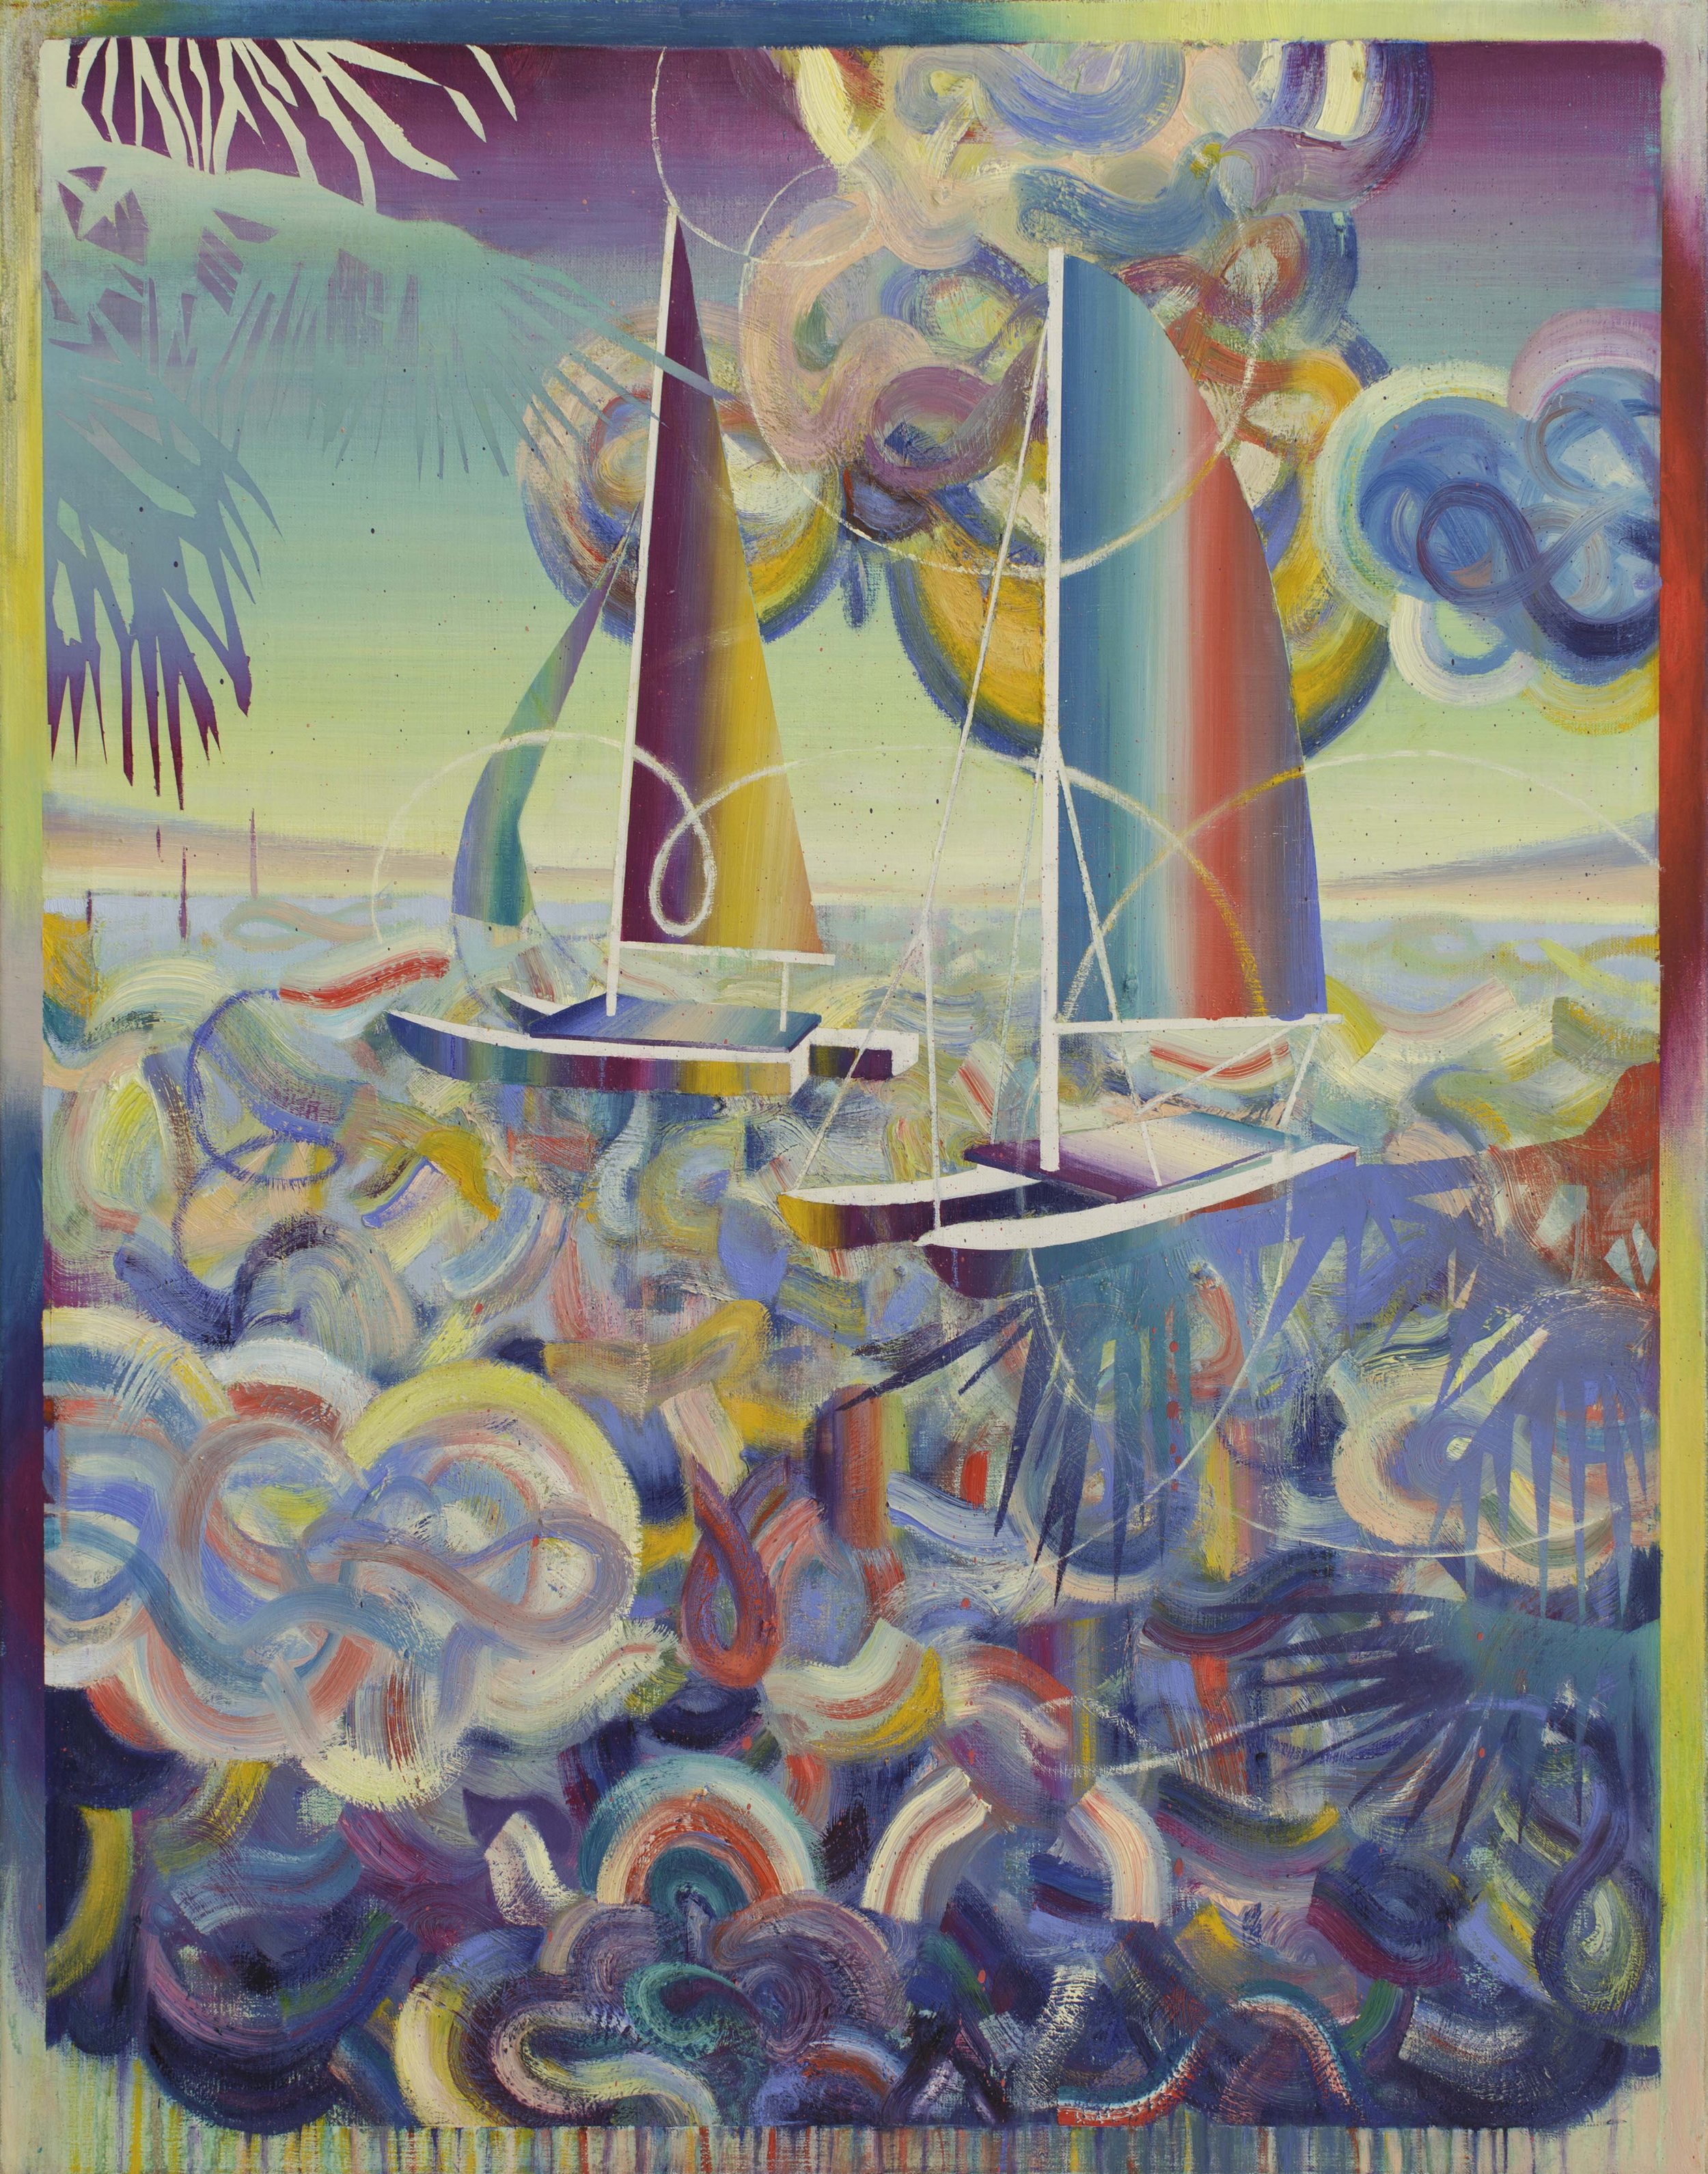   Pacific Standard Time  oil on canvas 95 x 75 cm, 2021 